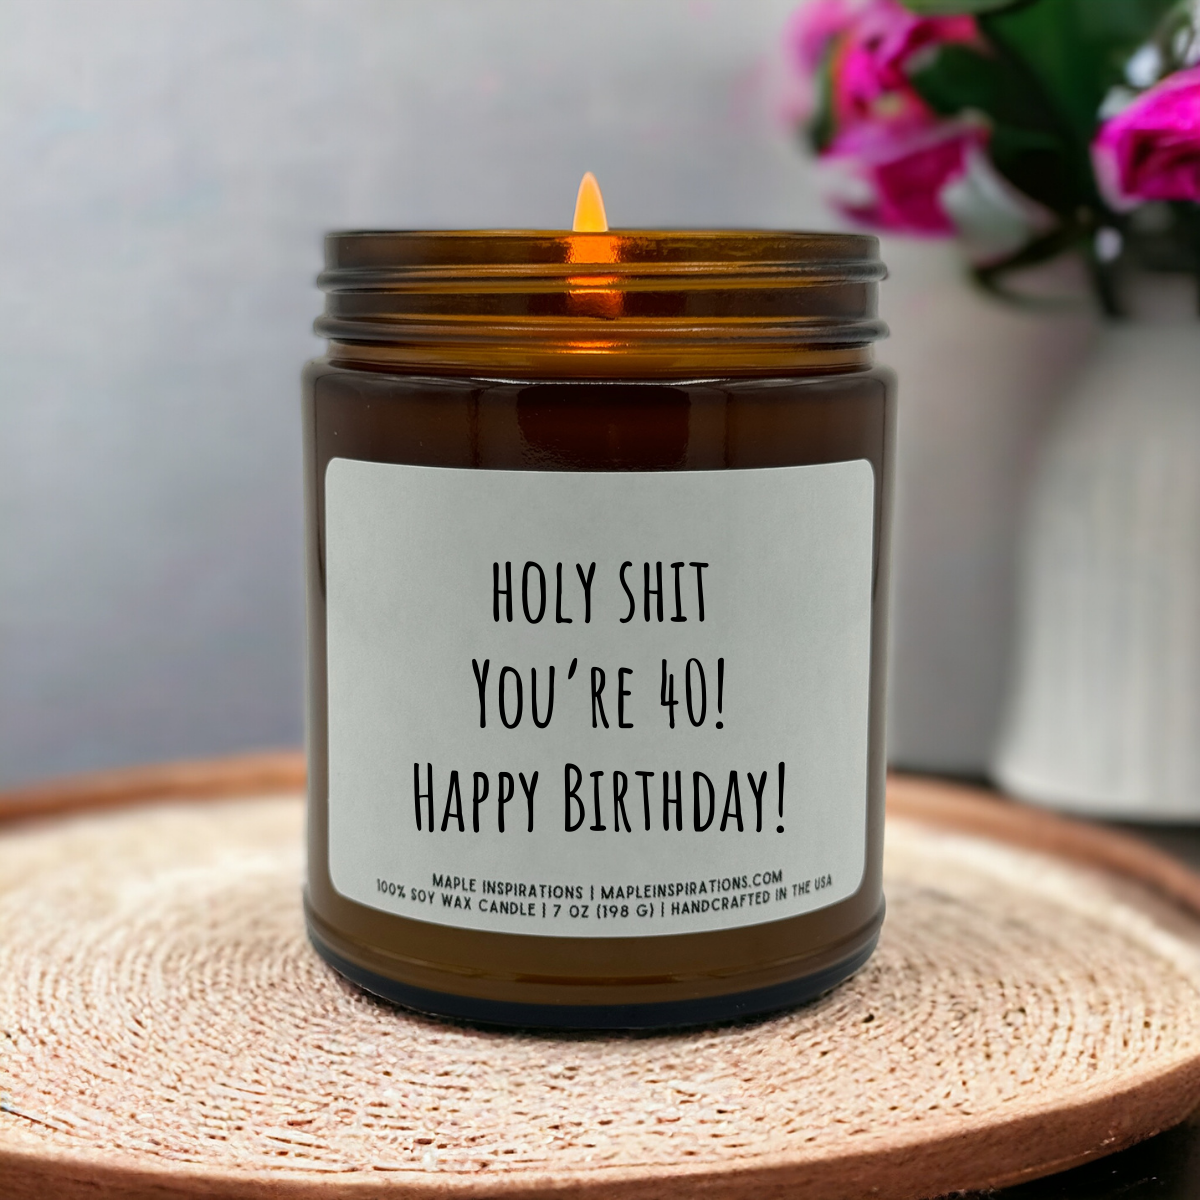 40th Birthday Candle, Funny 40th Birthday Gift, Funny Candle, Candle Gift, Gift For 40th Birthday Turning 40 Years Old, Holy Shit You're 40